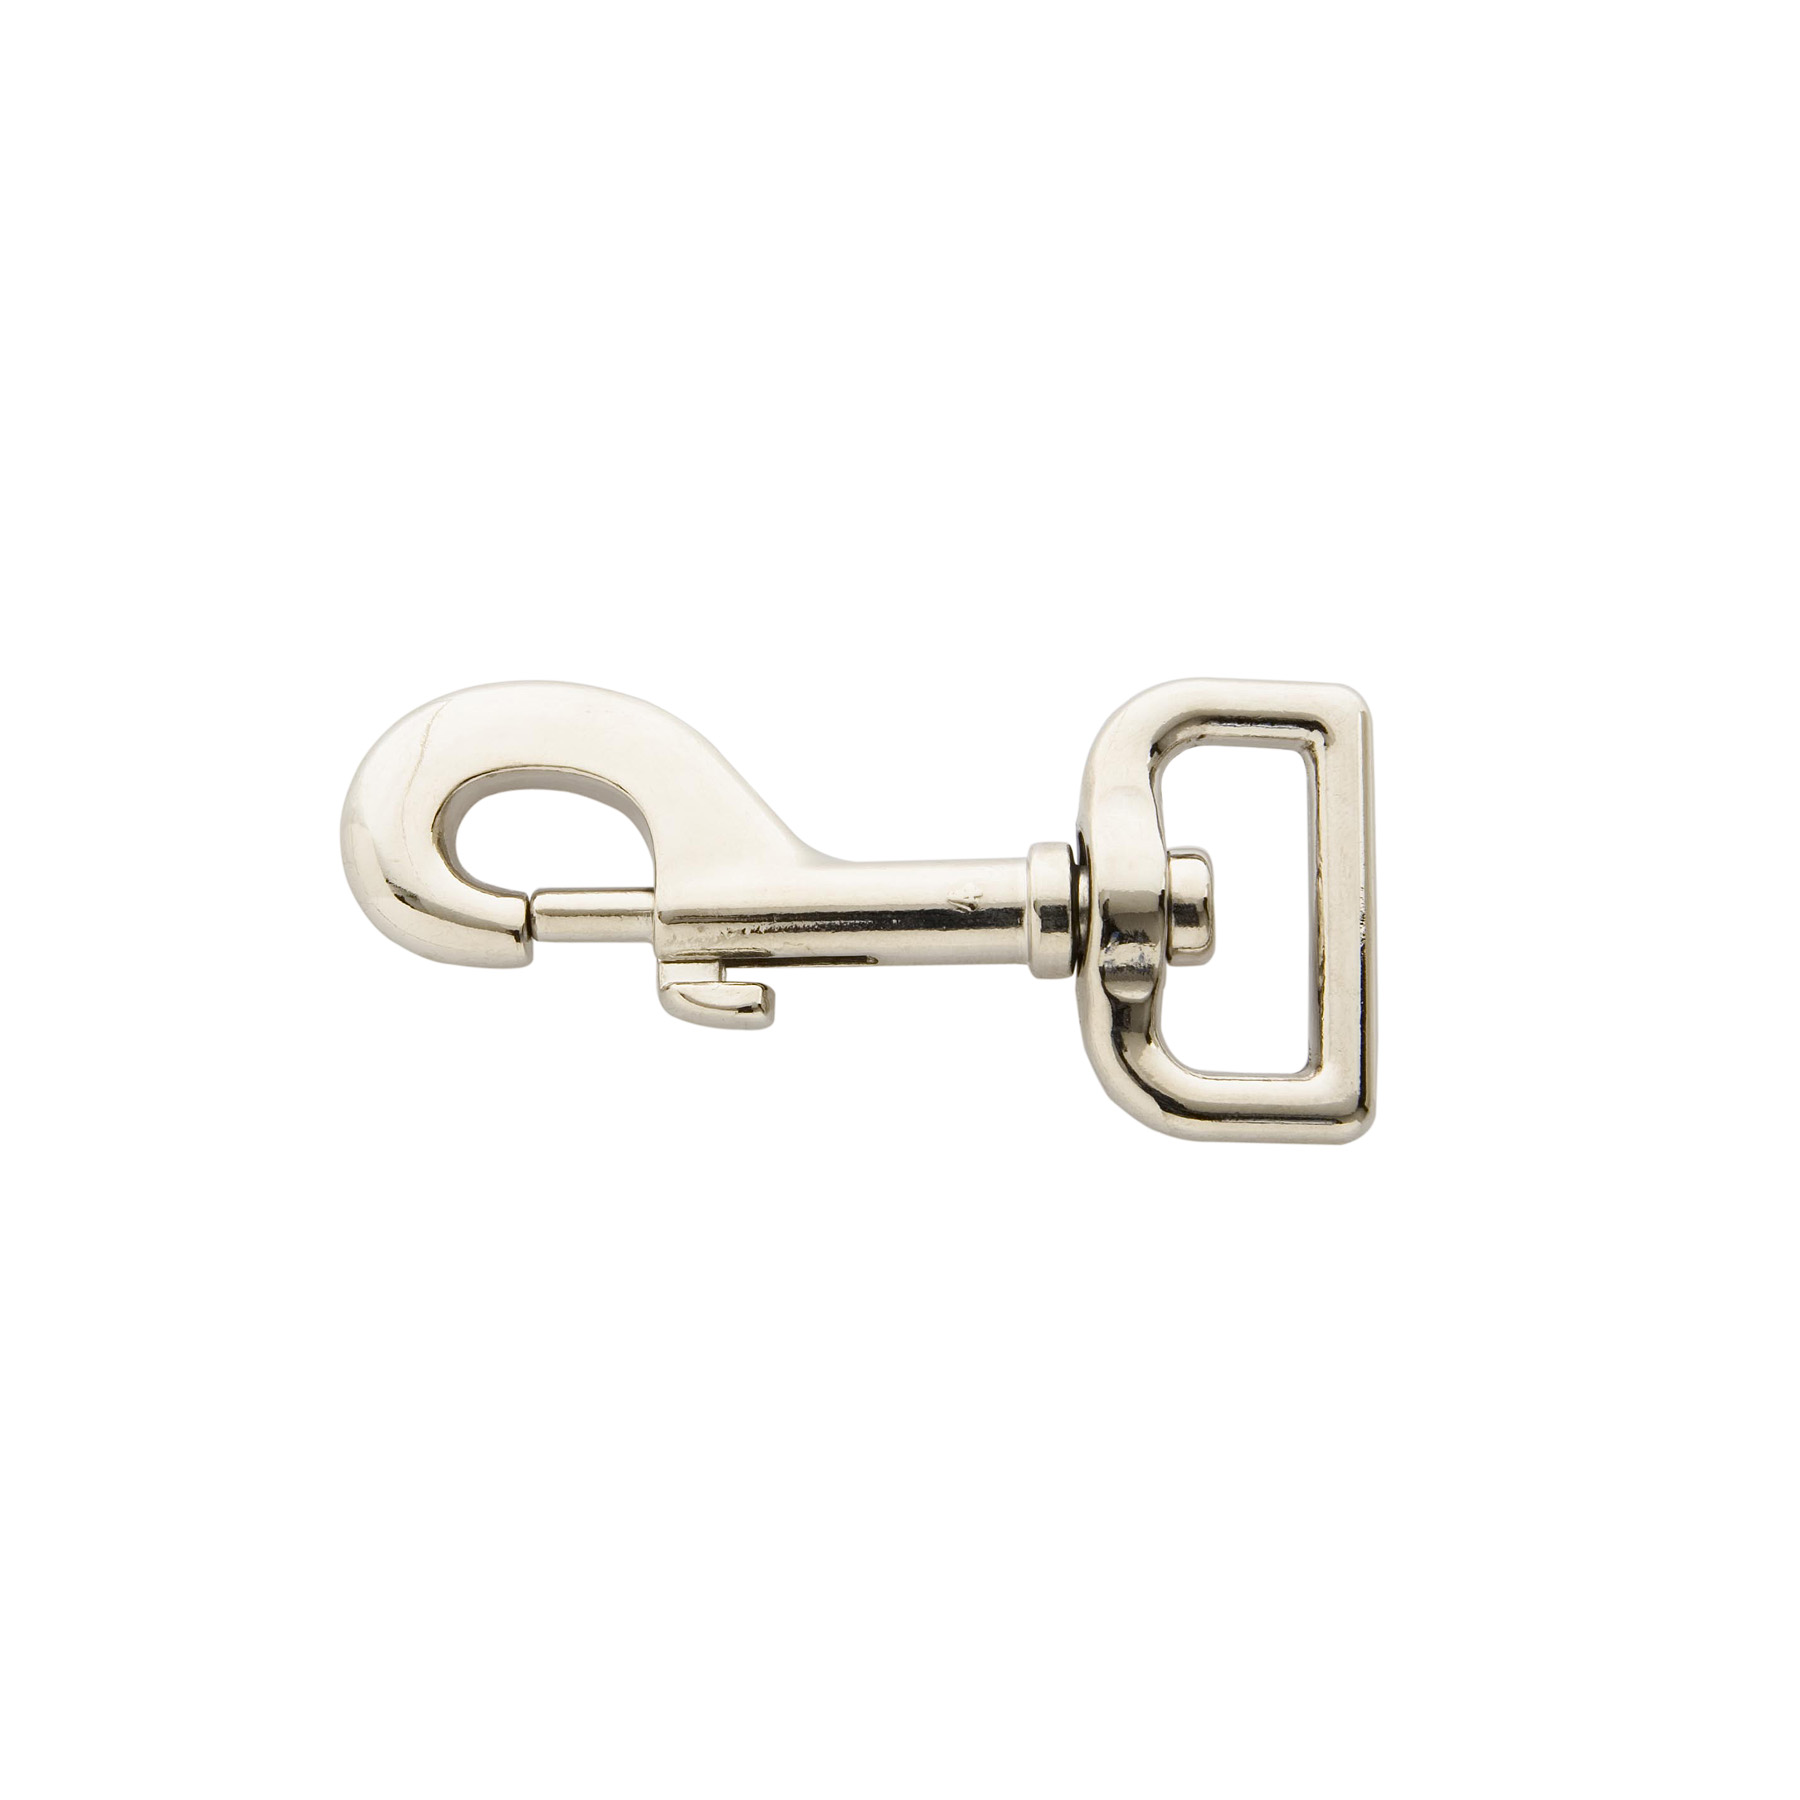 1 in 017z Nickel Plated - Bolt Snaps, Industrial Snap Hooks